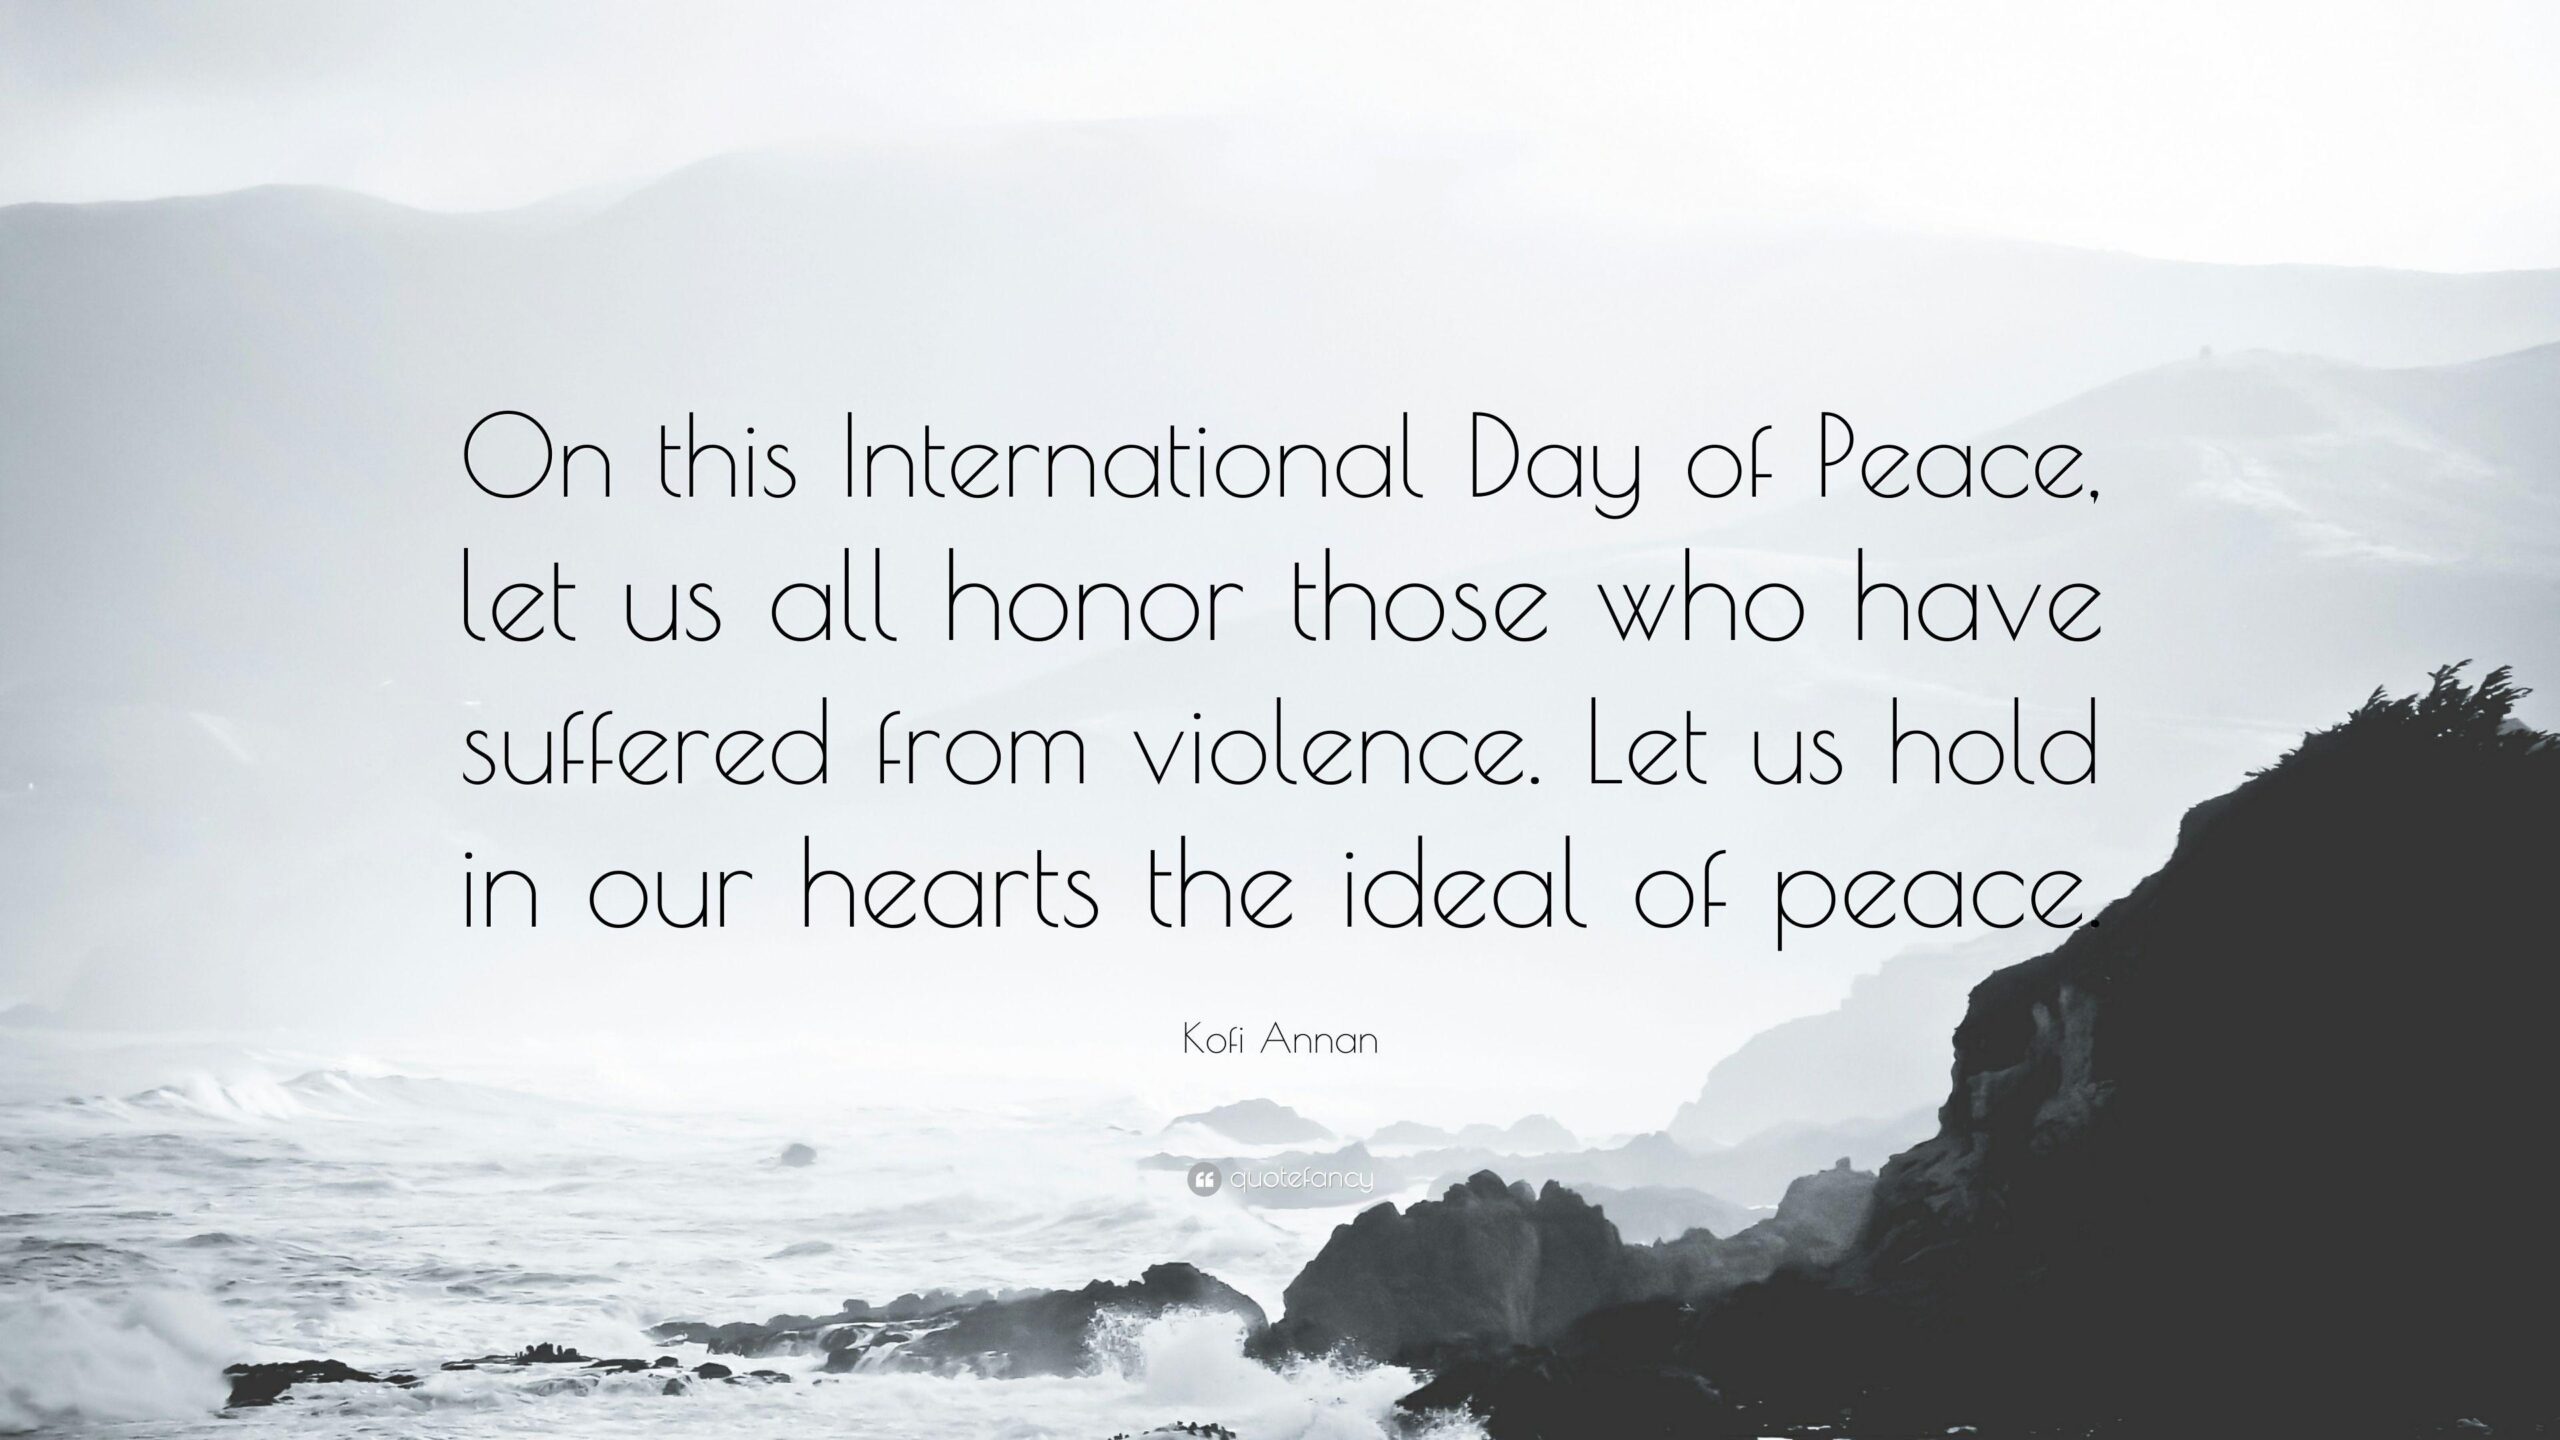 Kofi Annan Quote “On this International Day of Peace, let us all